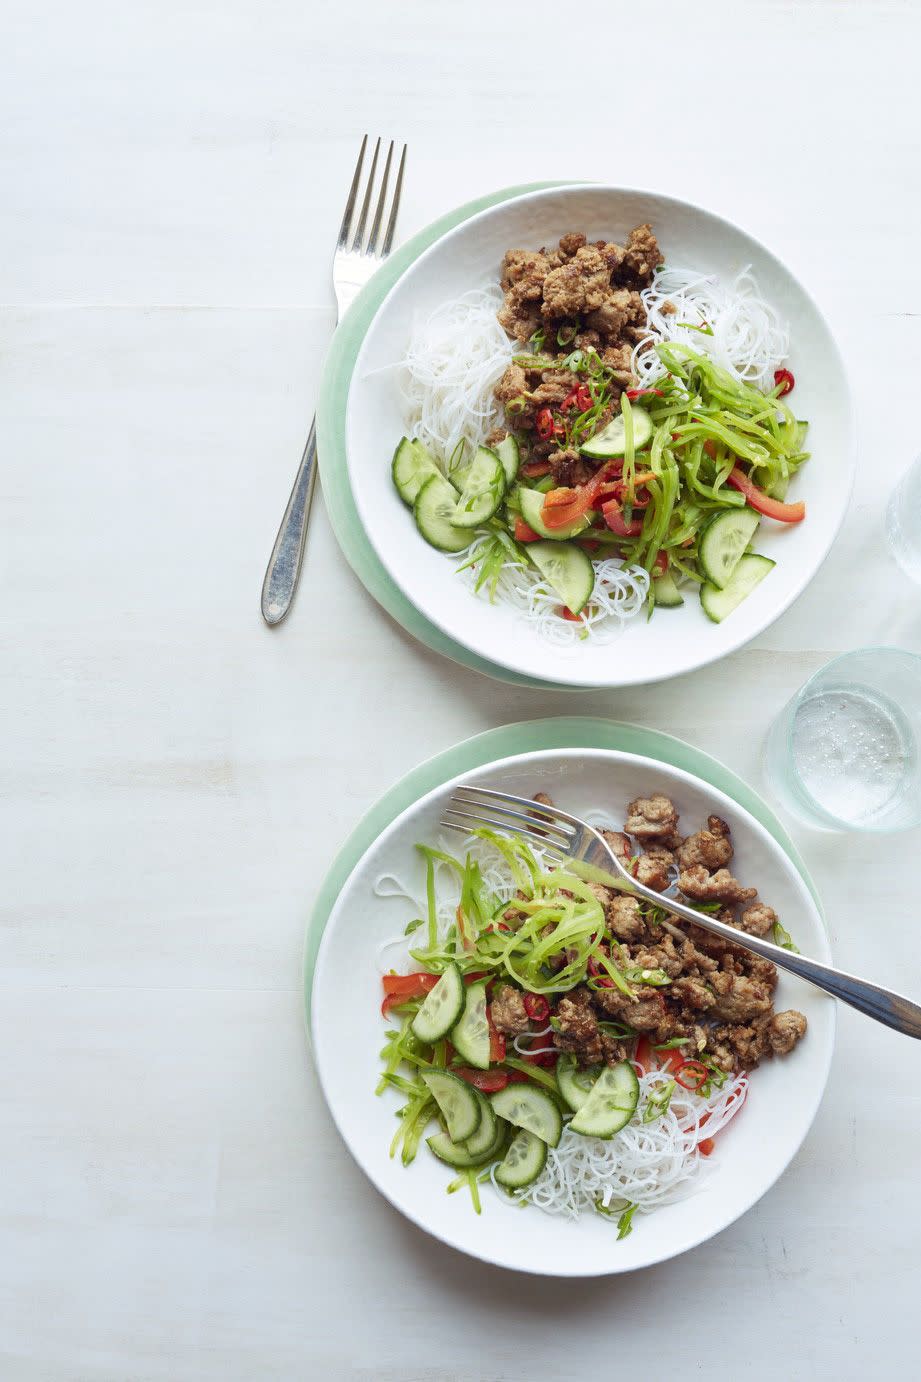 Gingery Asian Noodle Salad with Turkey and Cucumbers